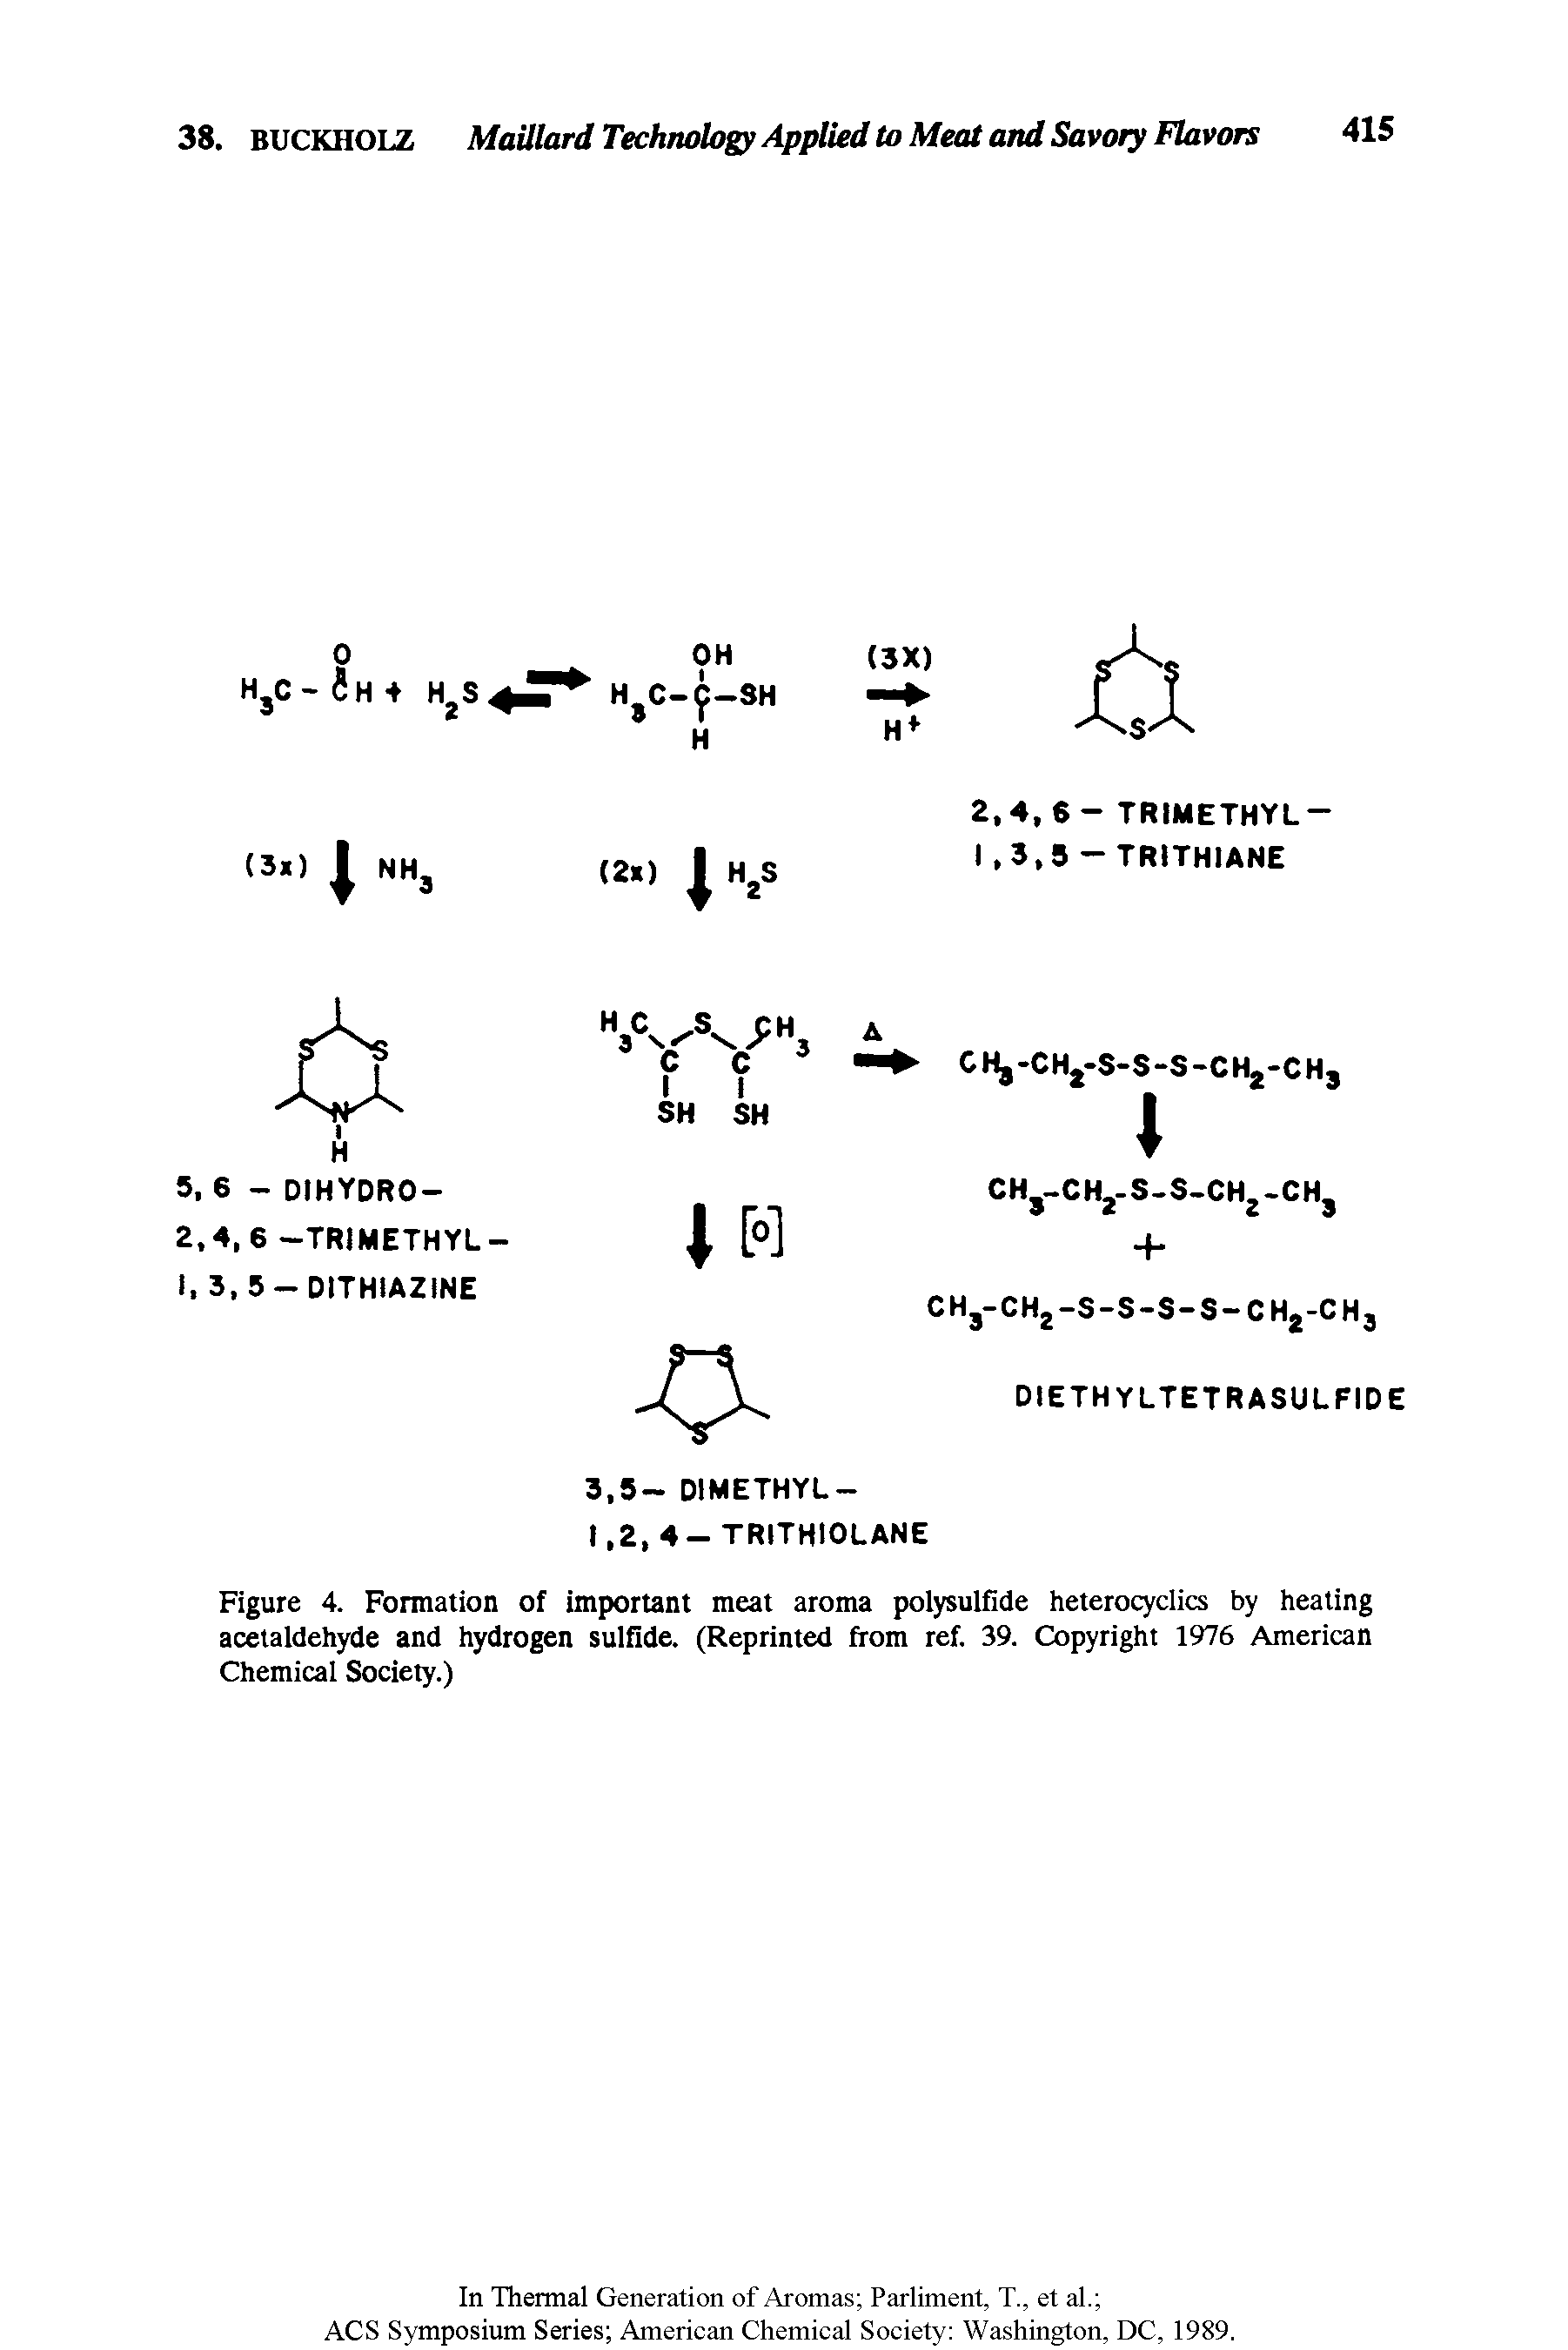 Figure 4. Formation of important meat aroma polysulfide heterocyclics by heating acetaldehyde and hydrogen sulfide. (Reprinted from ref. 39. Copyright 1976 American Chemical Society.)...